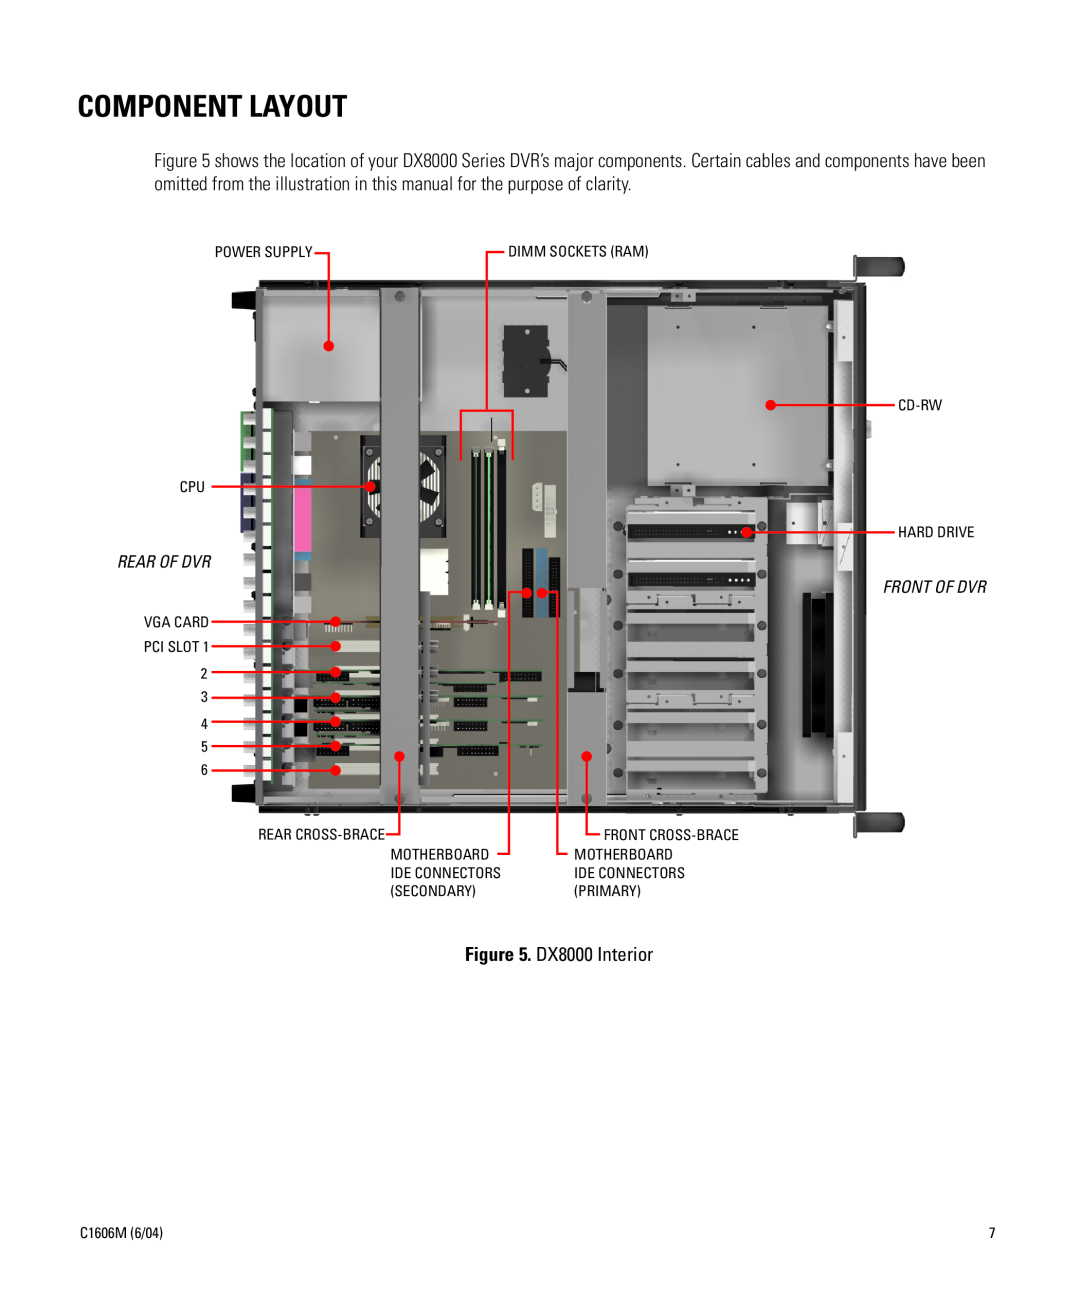 Pelco Dx8000 manual Component Layout 